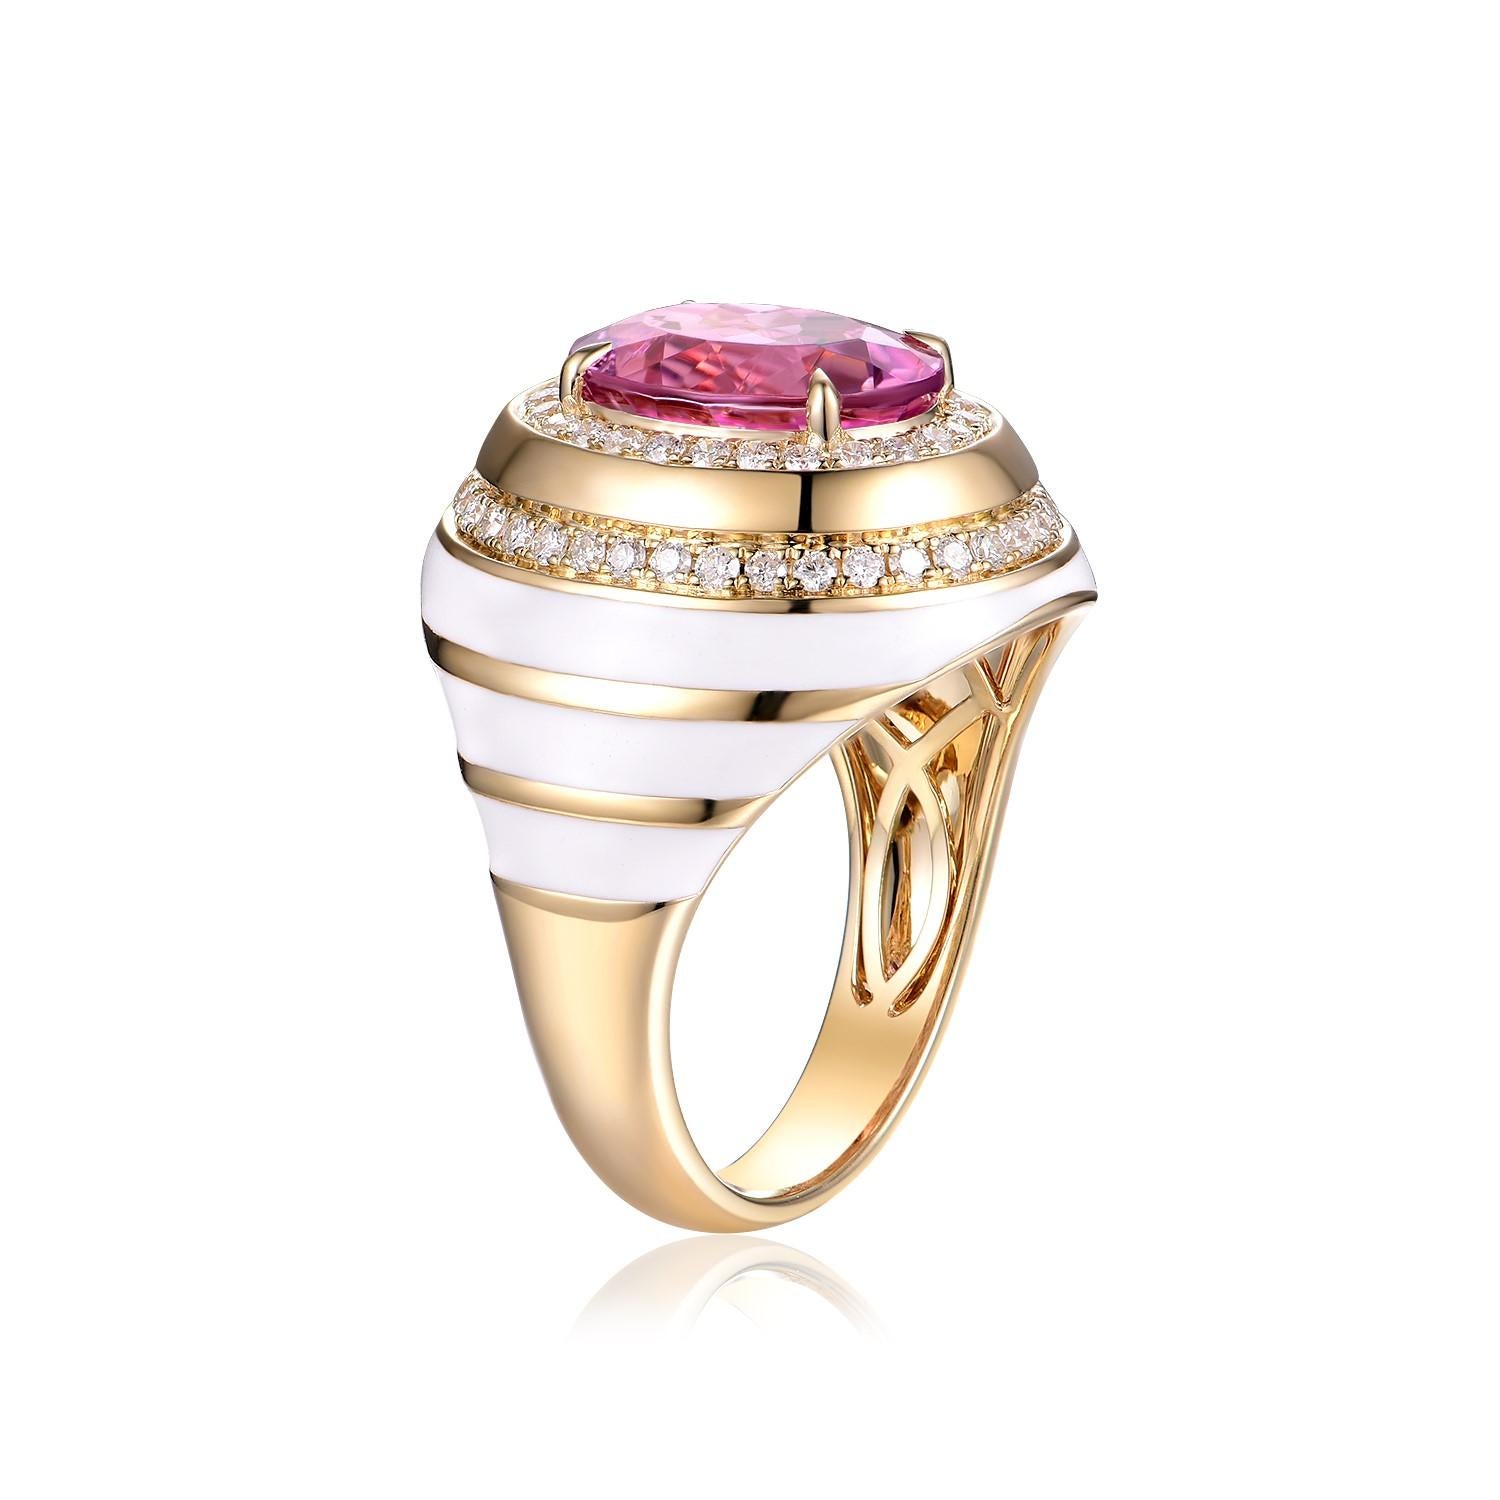 This exquisite ring, sized at US 6.75 with resizing available, showcases a stunning 3.45-carat oval tourmaline as its centerpiece. The tourmaline radiates with a rich pink color, offering an aura of luxury and charm. Surrounding the central gem is a